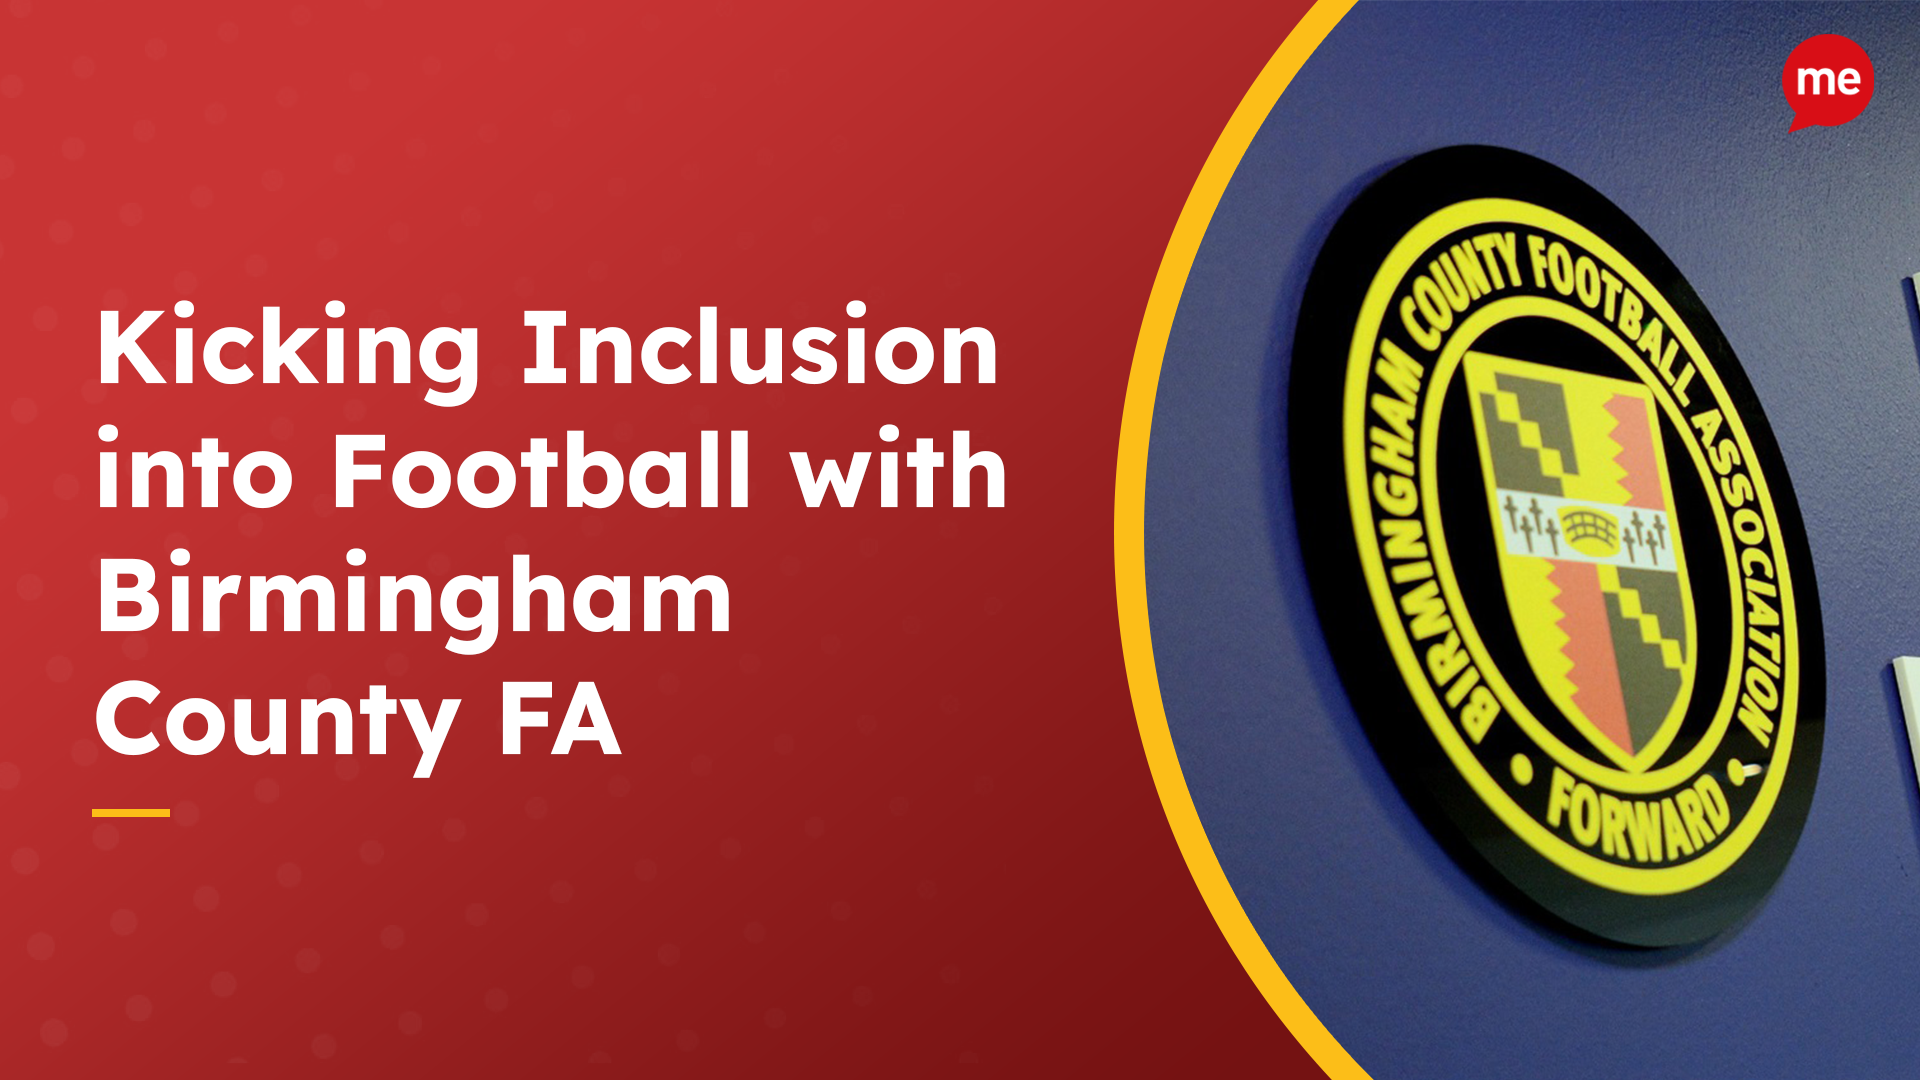 Kicking Inclusion into Football with Birmingham County FA